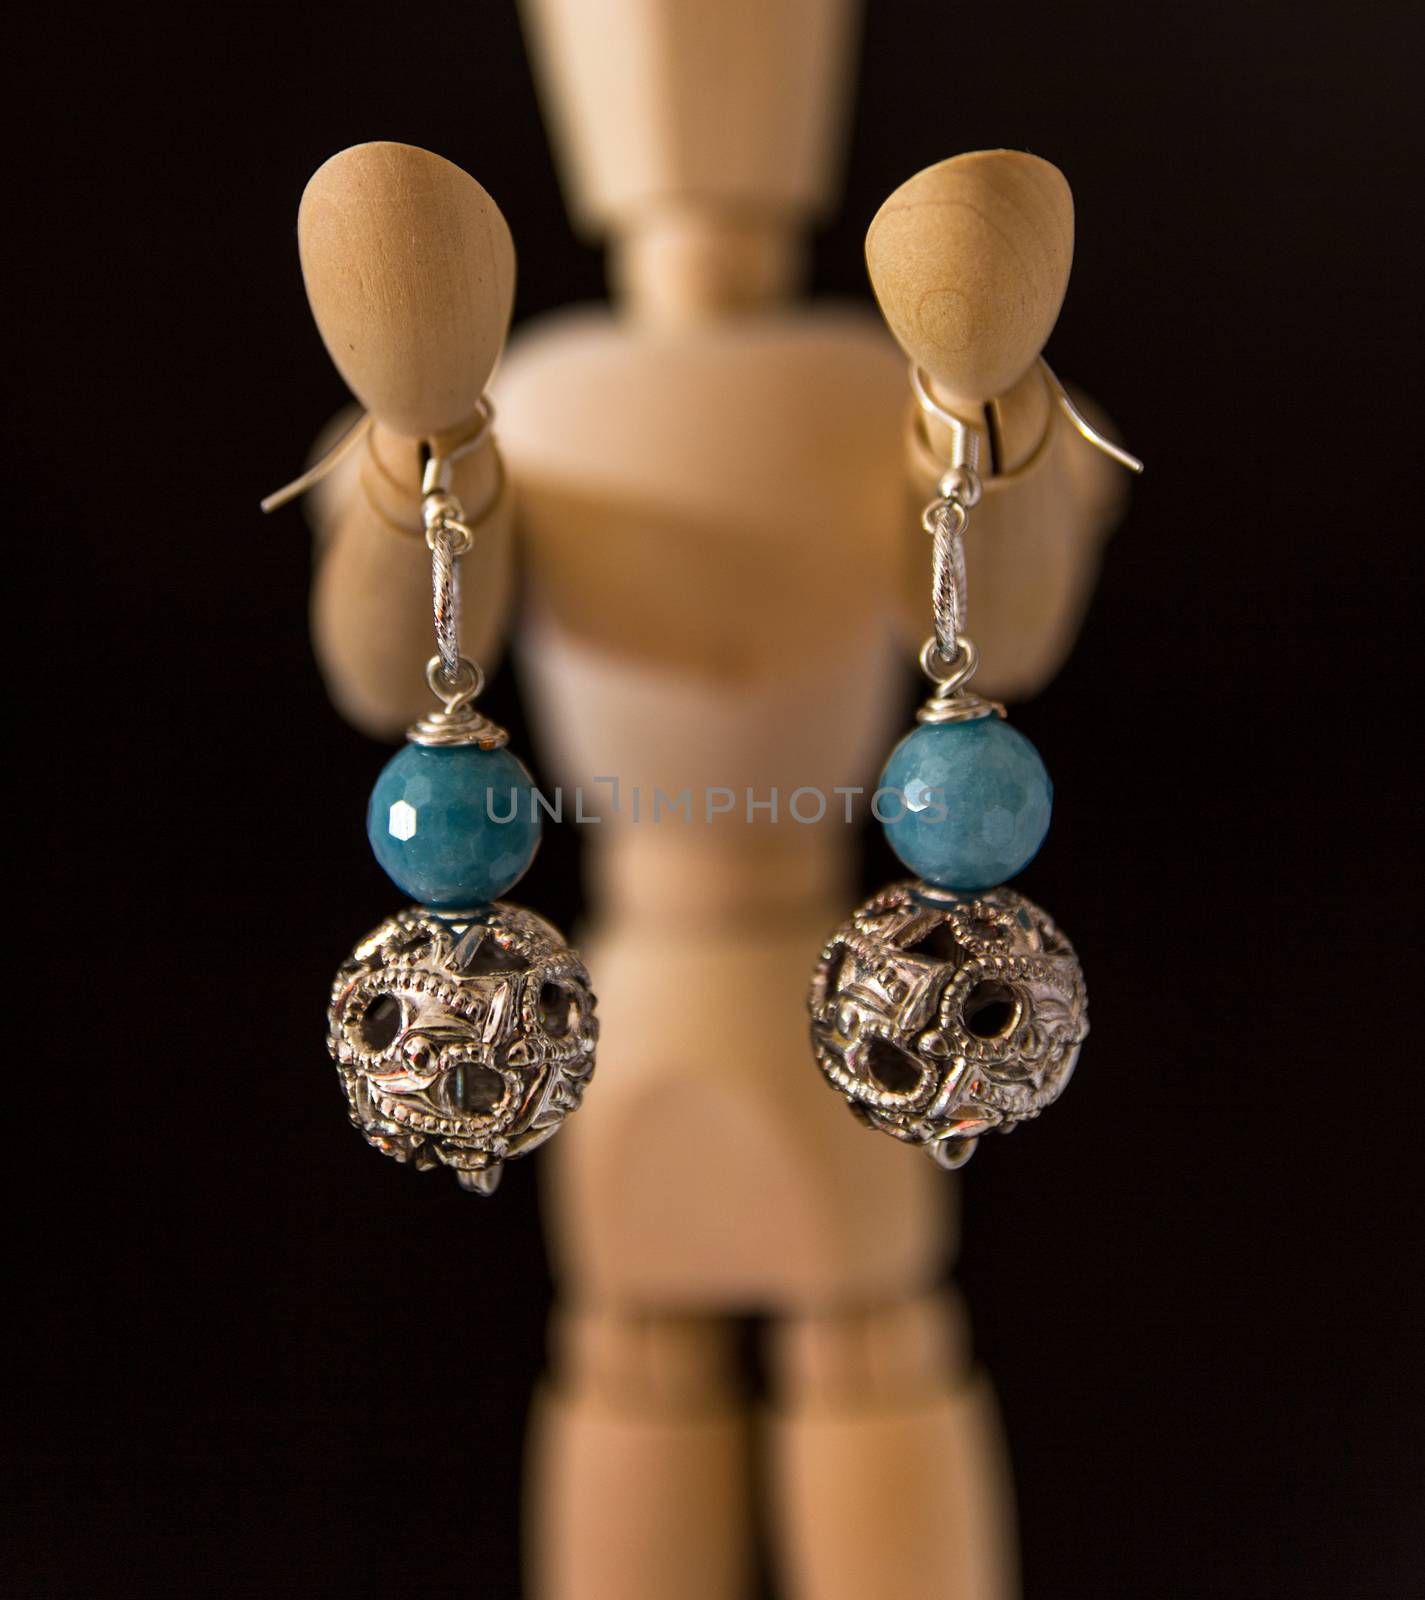 handcrafted jewelry by goghy73